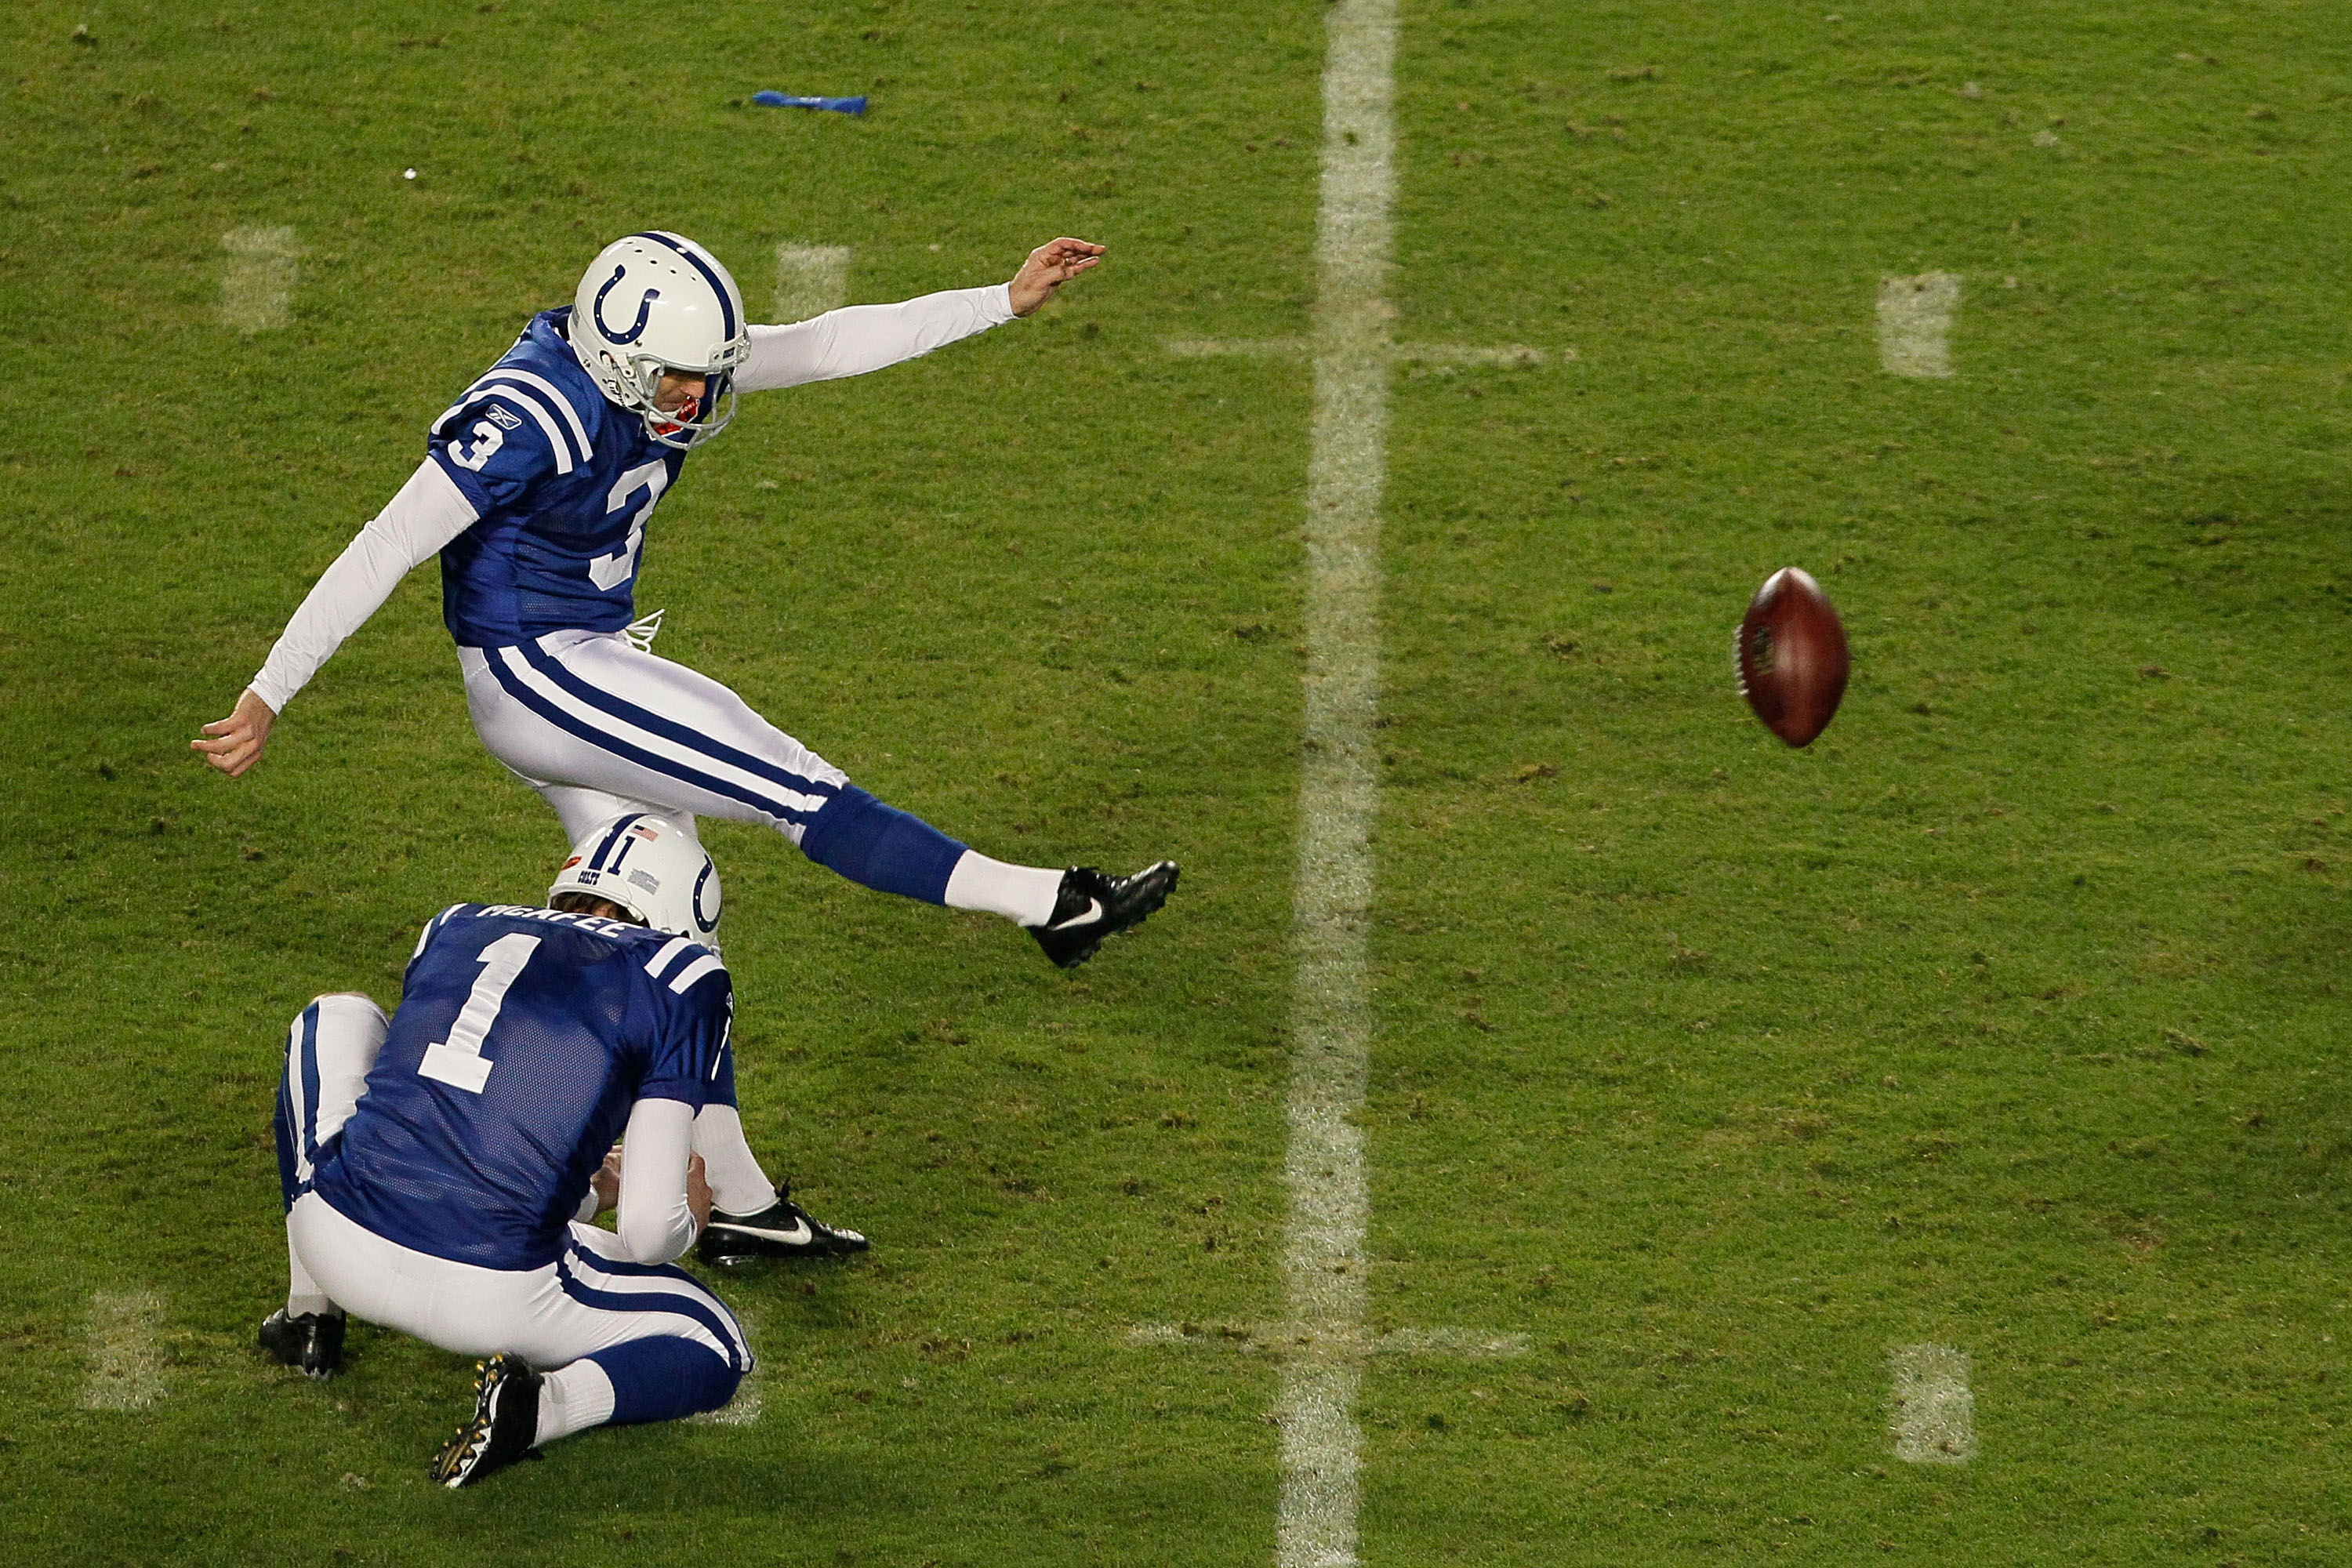 MIAMI GARDENS, FL - FEBRUARY 07: Matt Stover #3 of the Indianapolis Colts misses a 51 yard field goal in the fourth quarter against the New Orleans Saints during Super Bowl XLIV on February 7, 2010 at Sun Life Stadium in Miami Gardens, Florida.  (Photo by